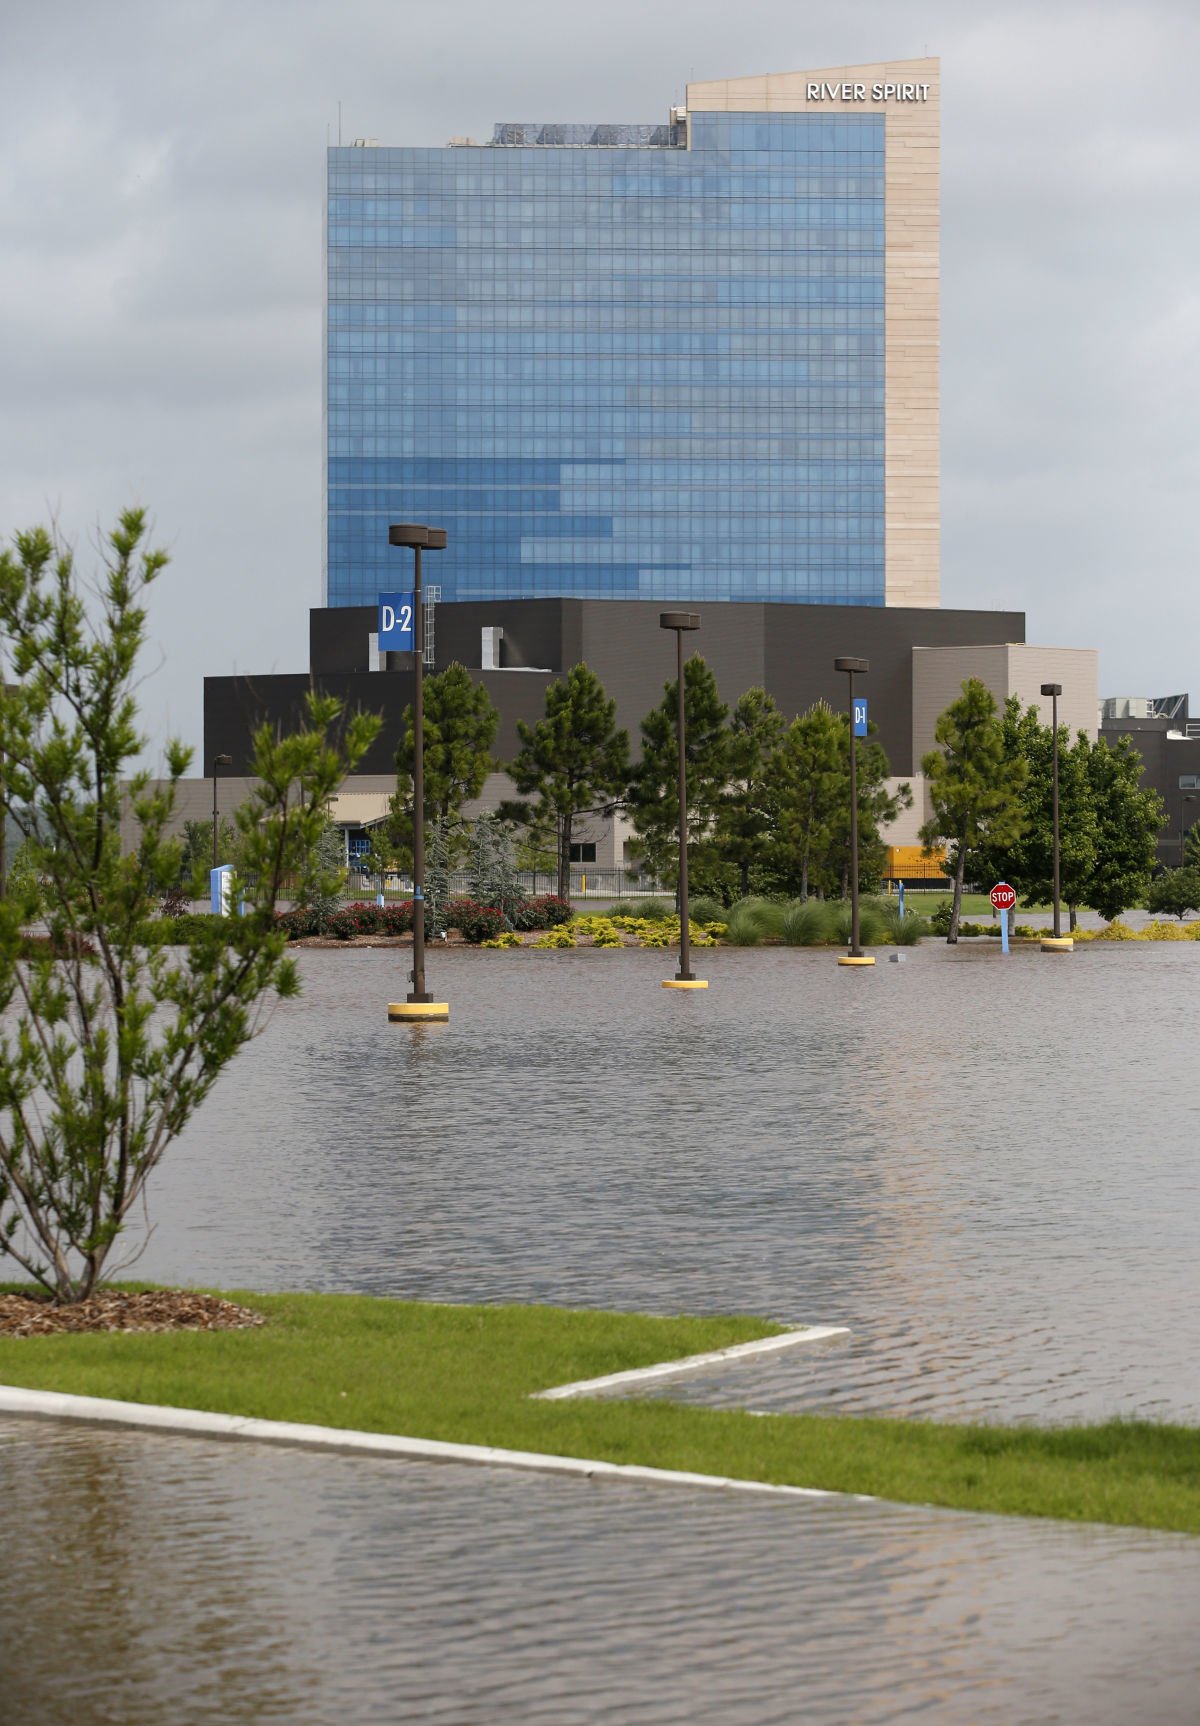 is the tulsa river spirit casino leaning